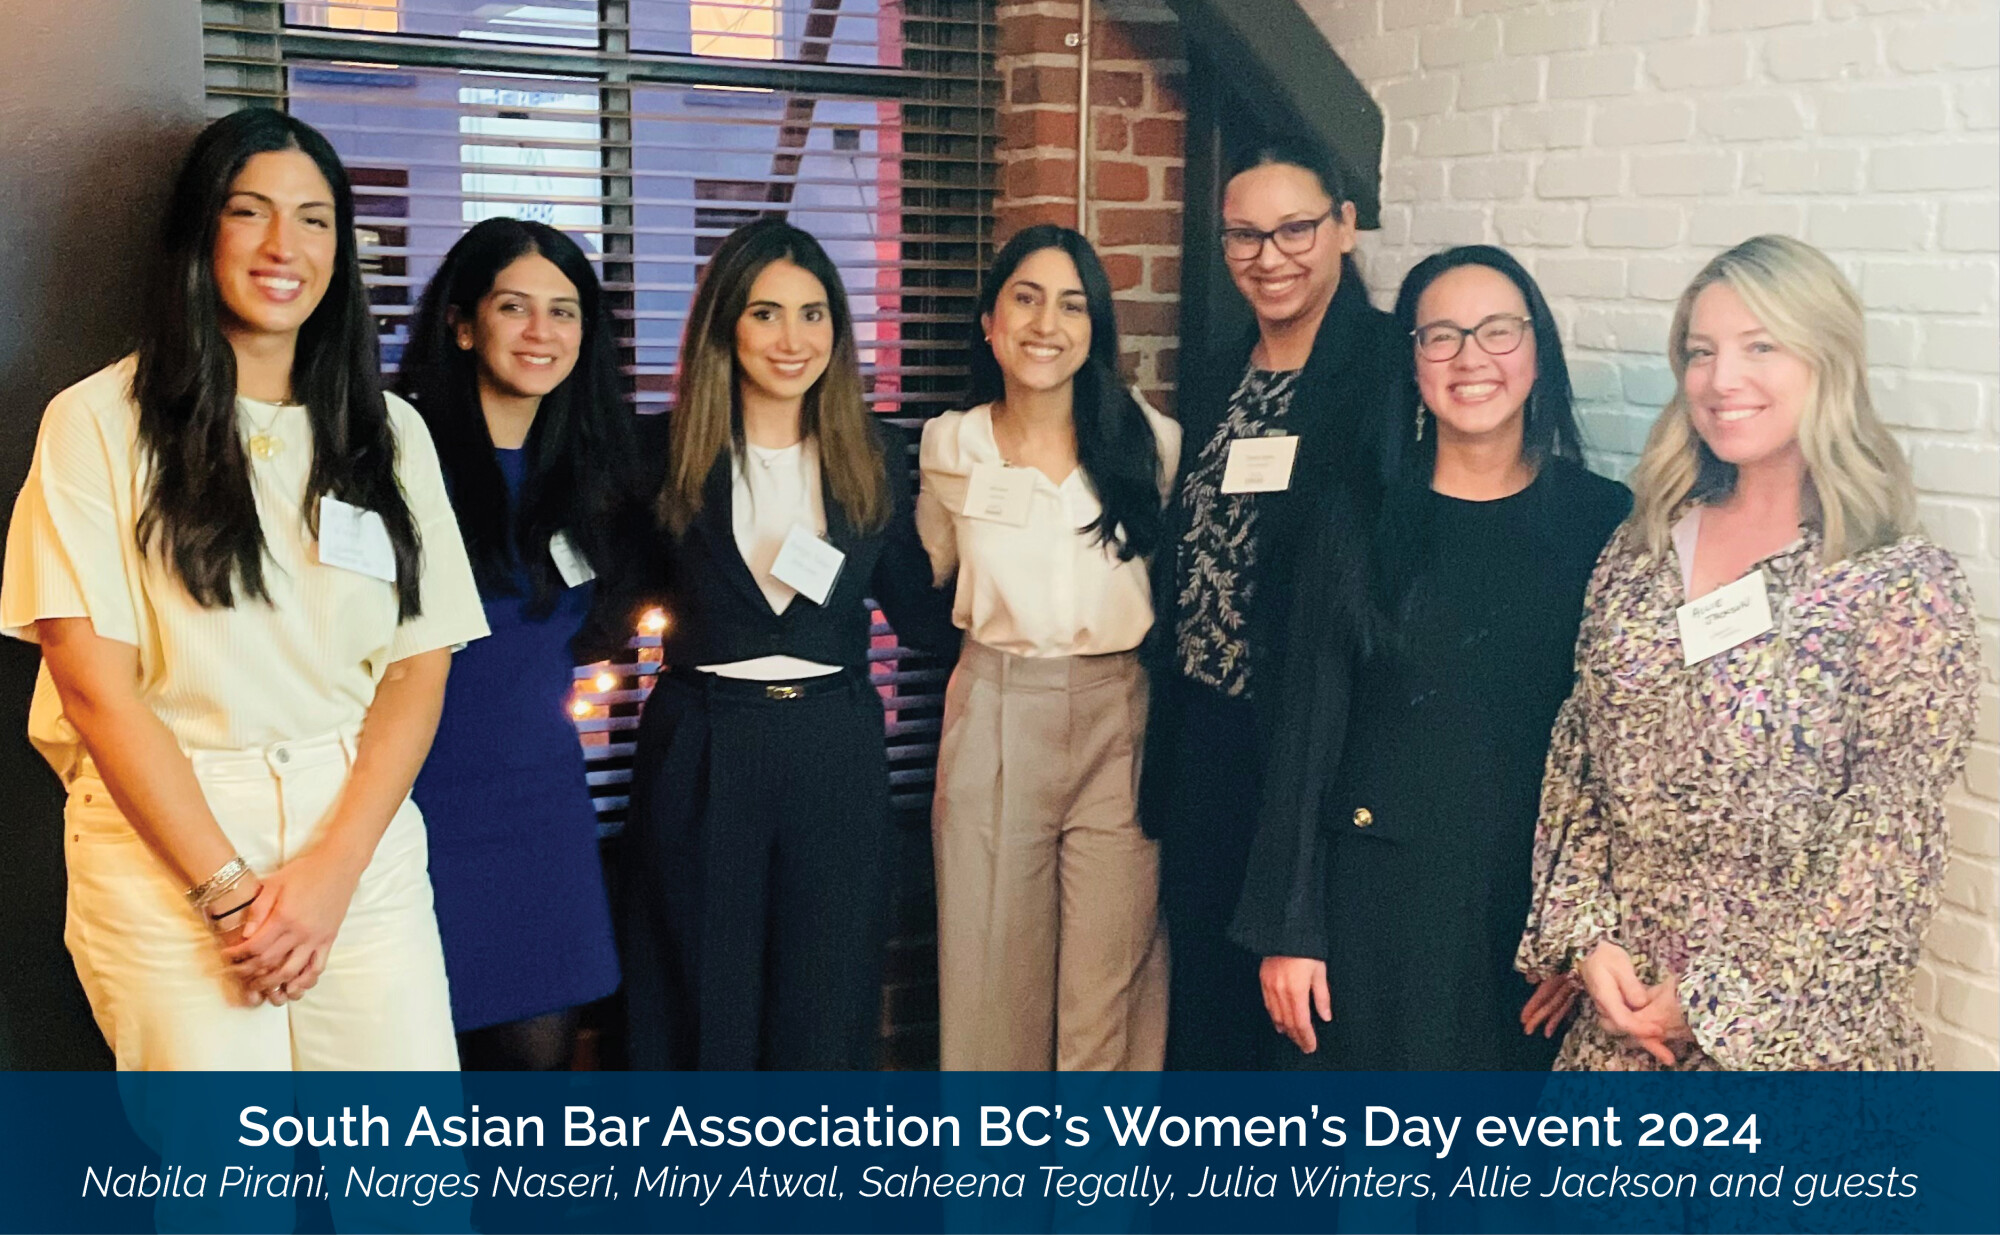 South Asian Bar Association BC's Women's Day event 2024